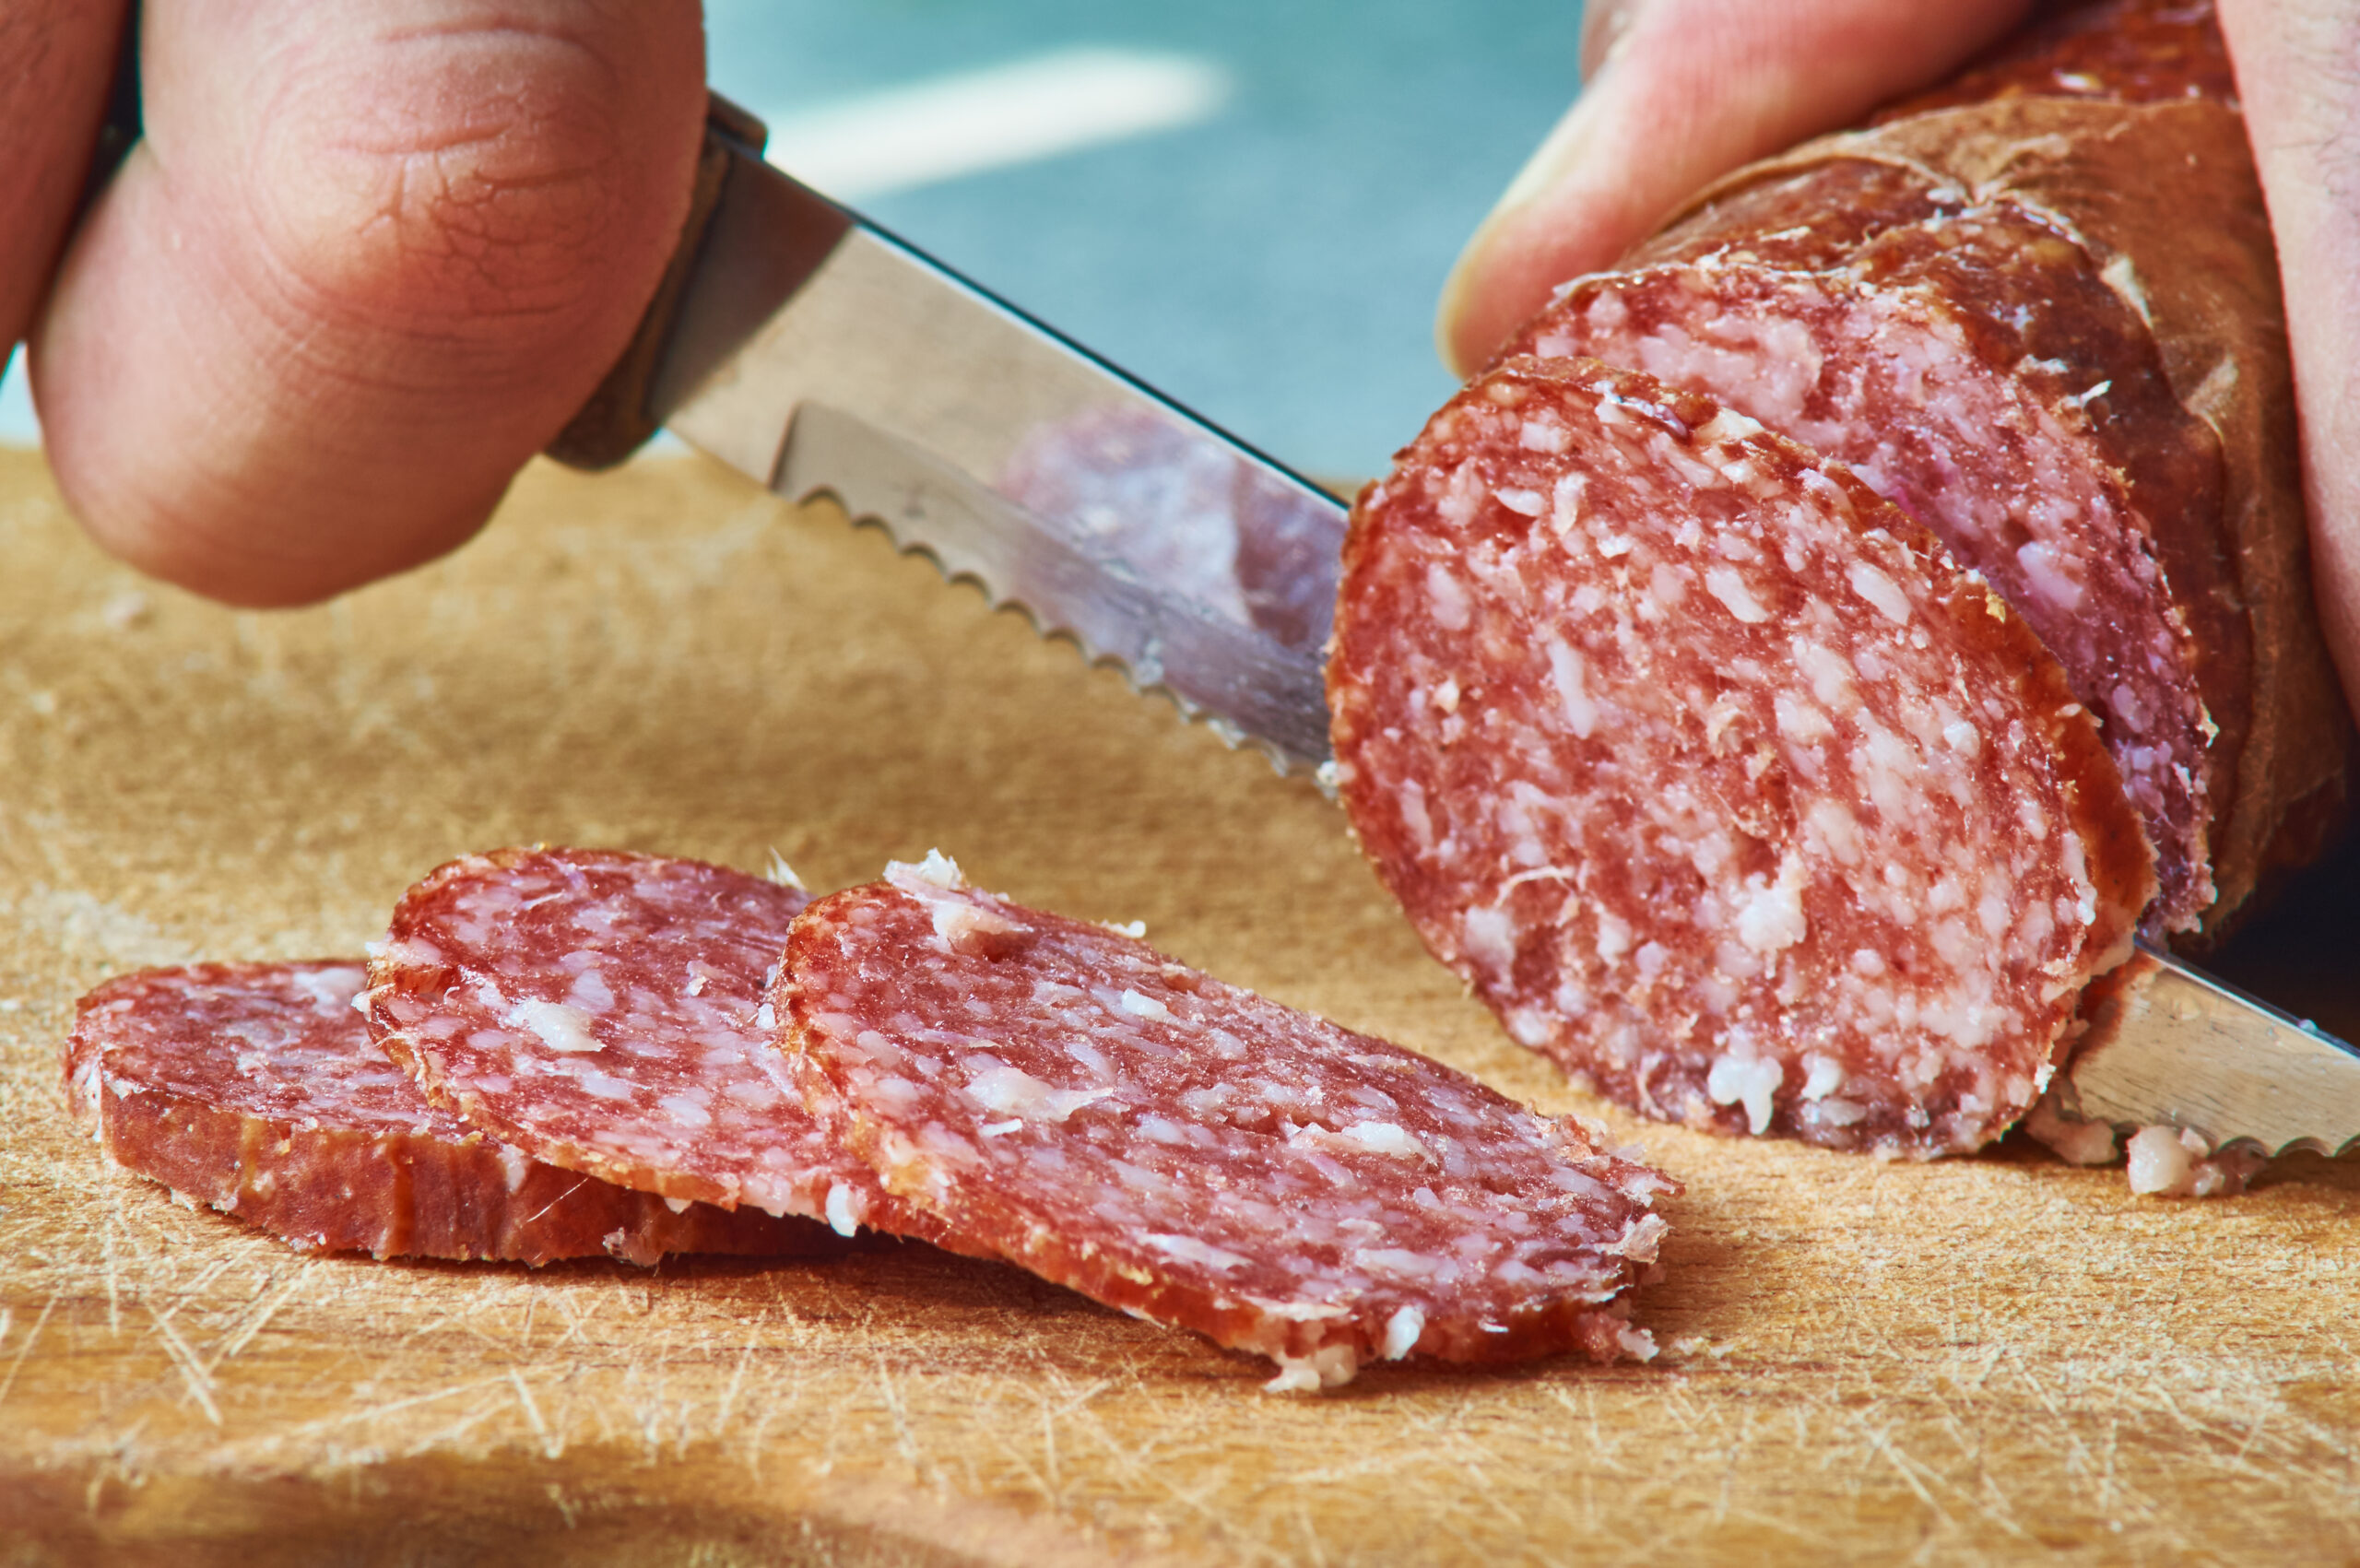 Male hand is cutting a sausage using serrated knife closeup